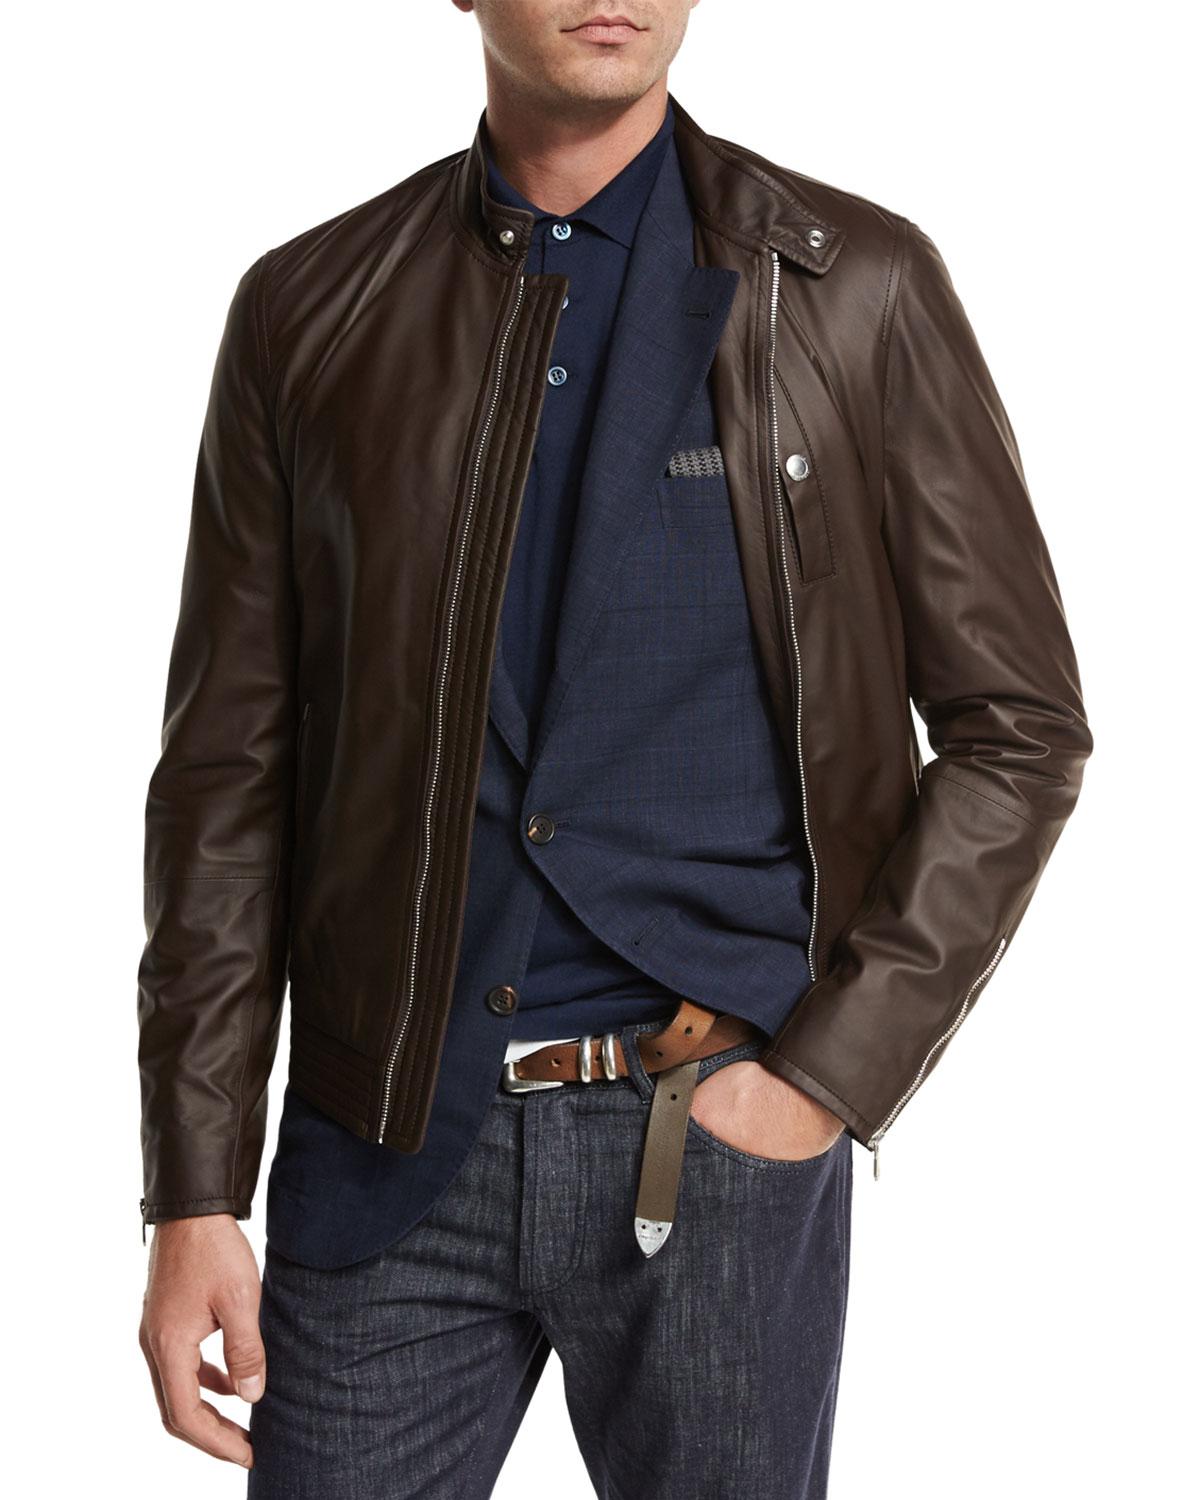 Lyst - Brunello Cucinelli Lamb Leather Pilot Jacket in Brown for Men